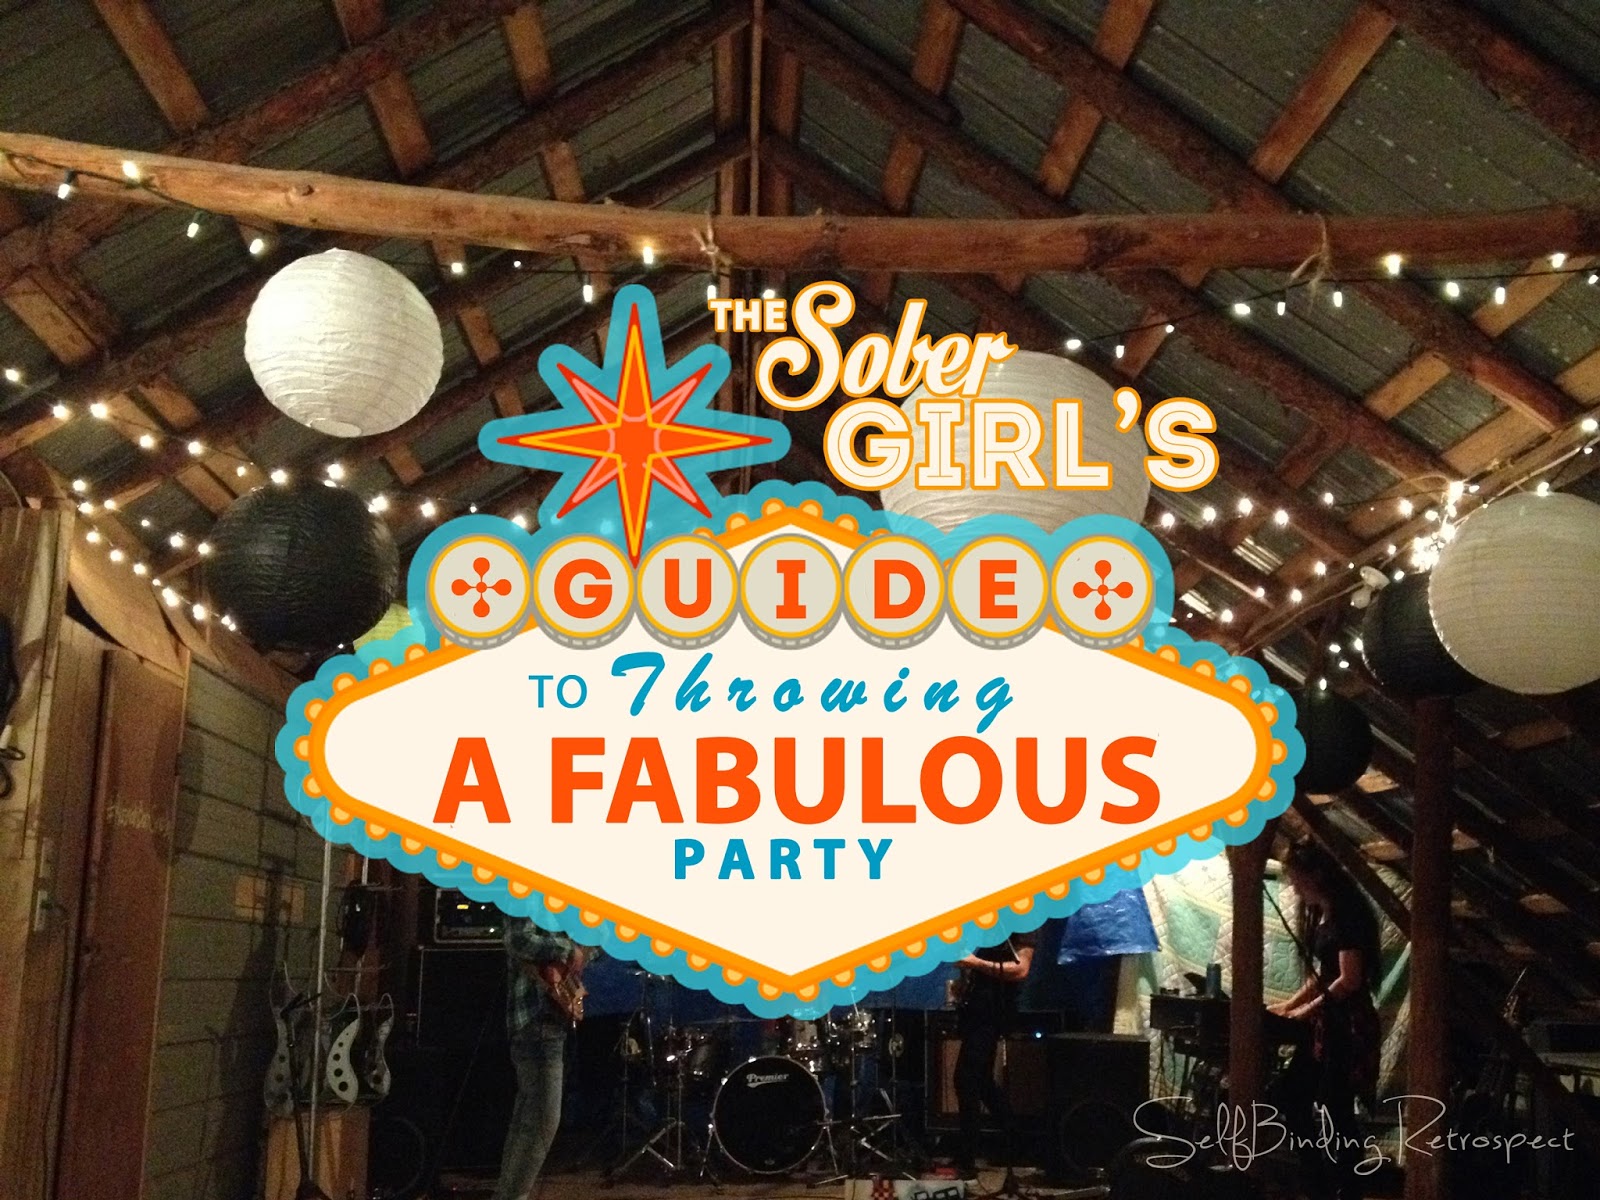 Sober Girls Guide to Throwing a Fabulous Party - SelfBinding Retrospect by Alanna Rusnak